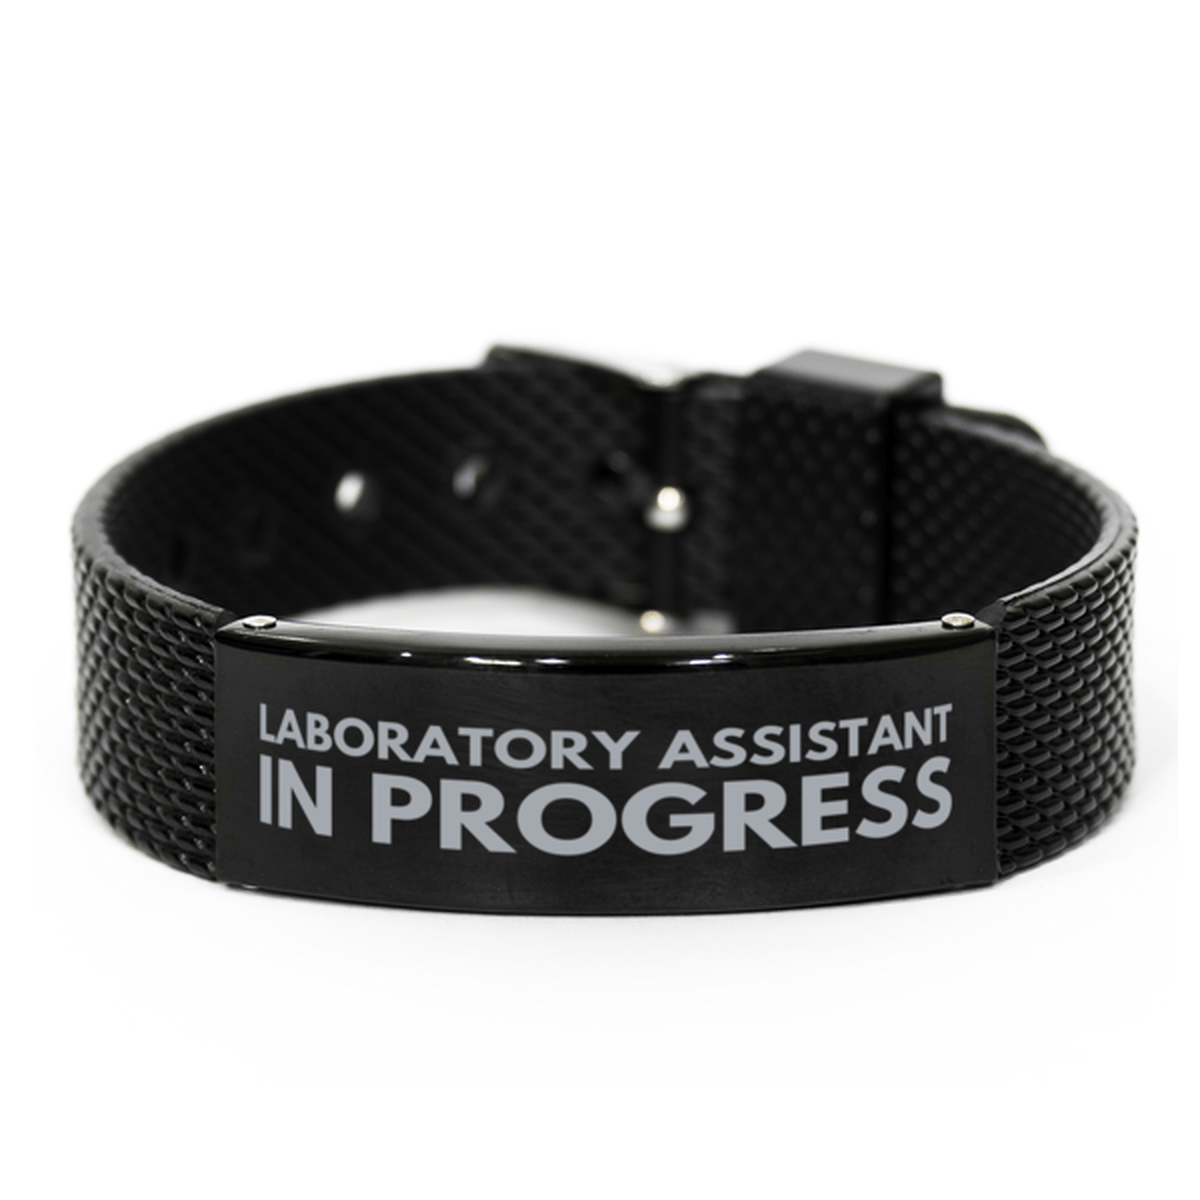 Inspirational Laboratory Assistant Black Shark Mesh Bracelet, Laboratory Assistant In Progress, Best Graduation Gifts for Students